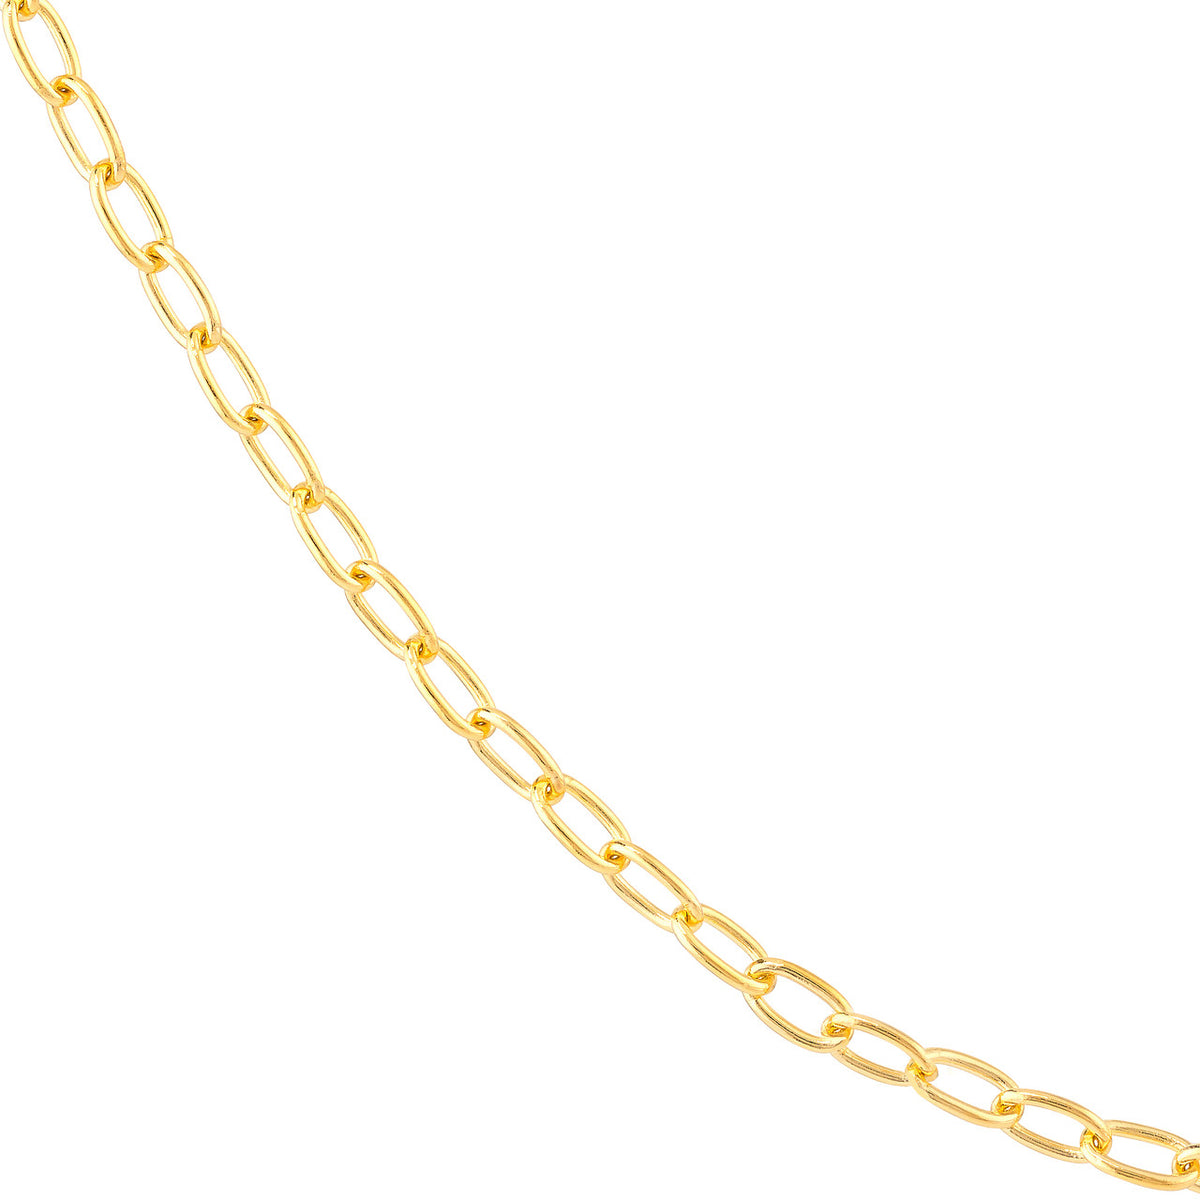 14K Yellow Gold or White Gold or Rose Gold 2.10mm Forzentina Chain Necklace with Lobster Lock